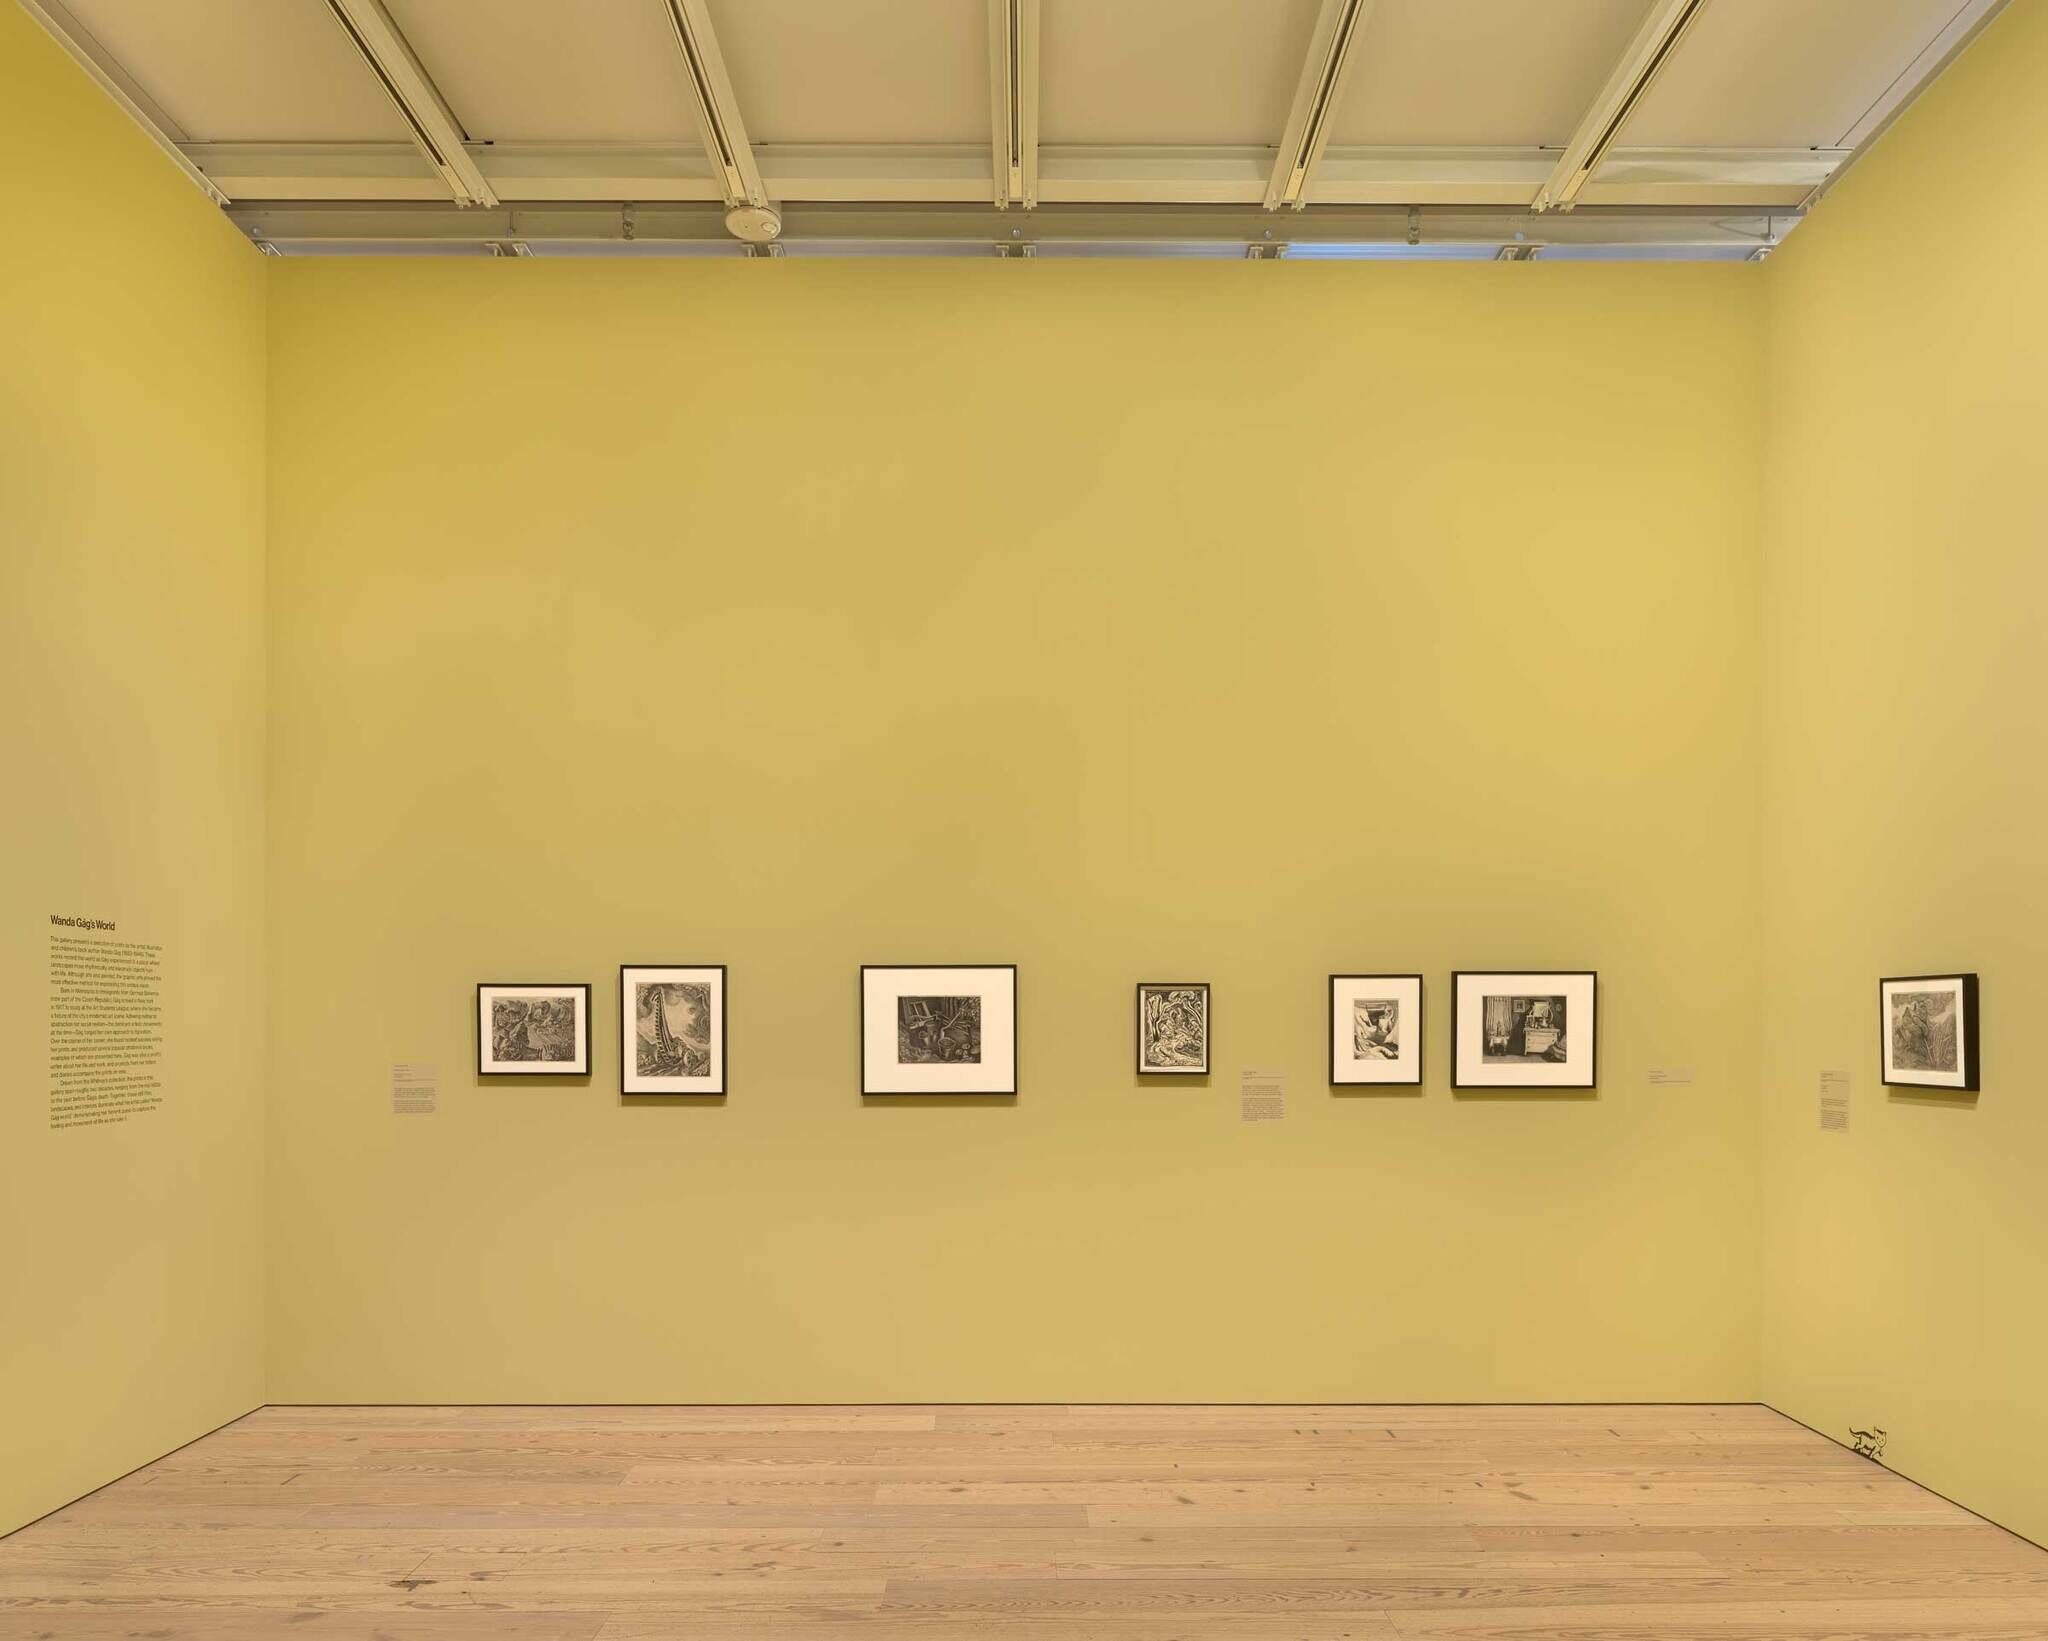 A bright gallery room with yellow walls displaying framed black and white artwork, wooden floors, and track lighting.